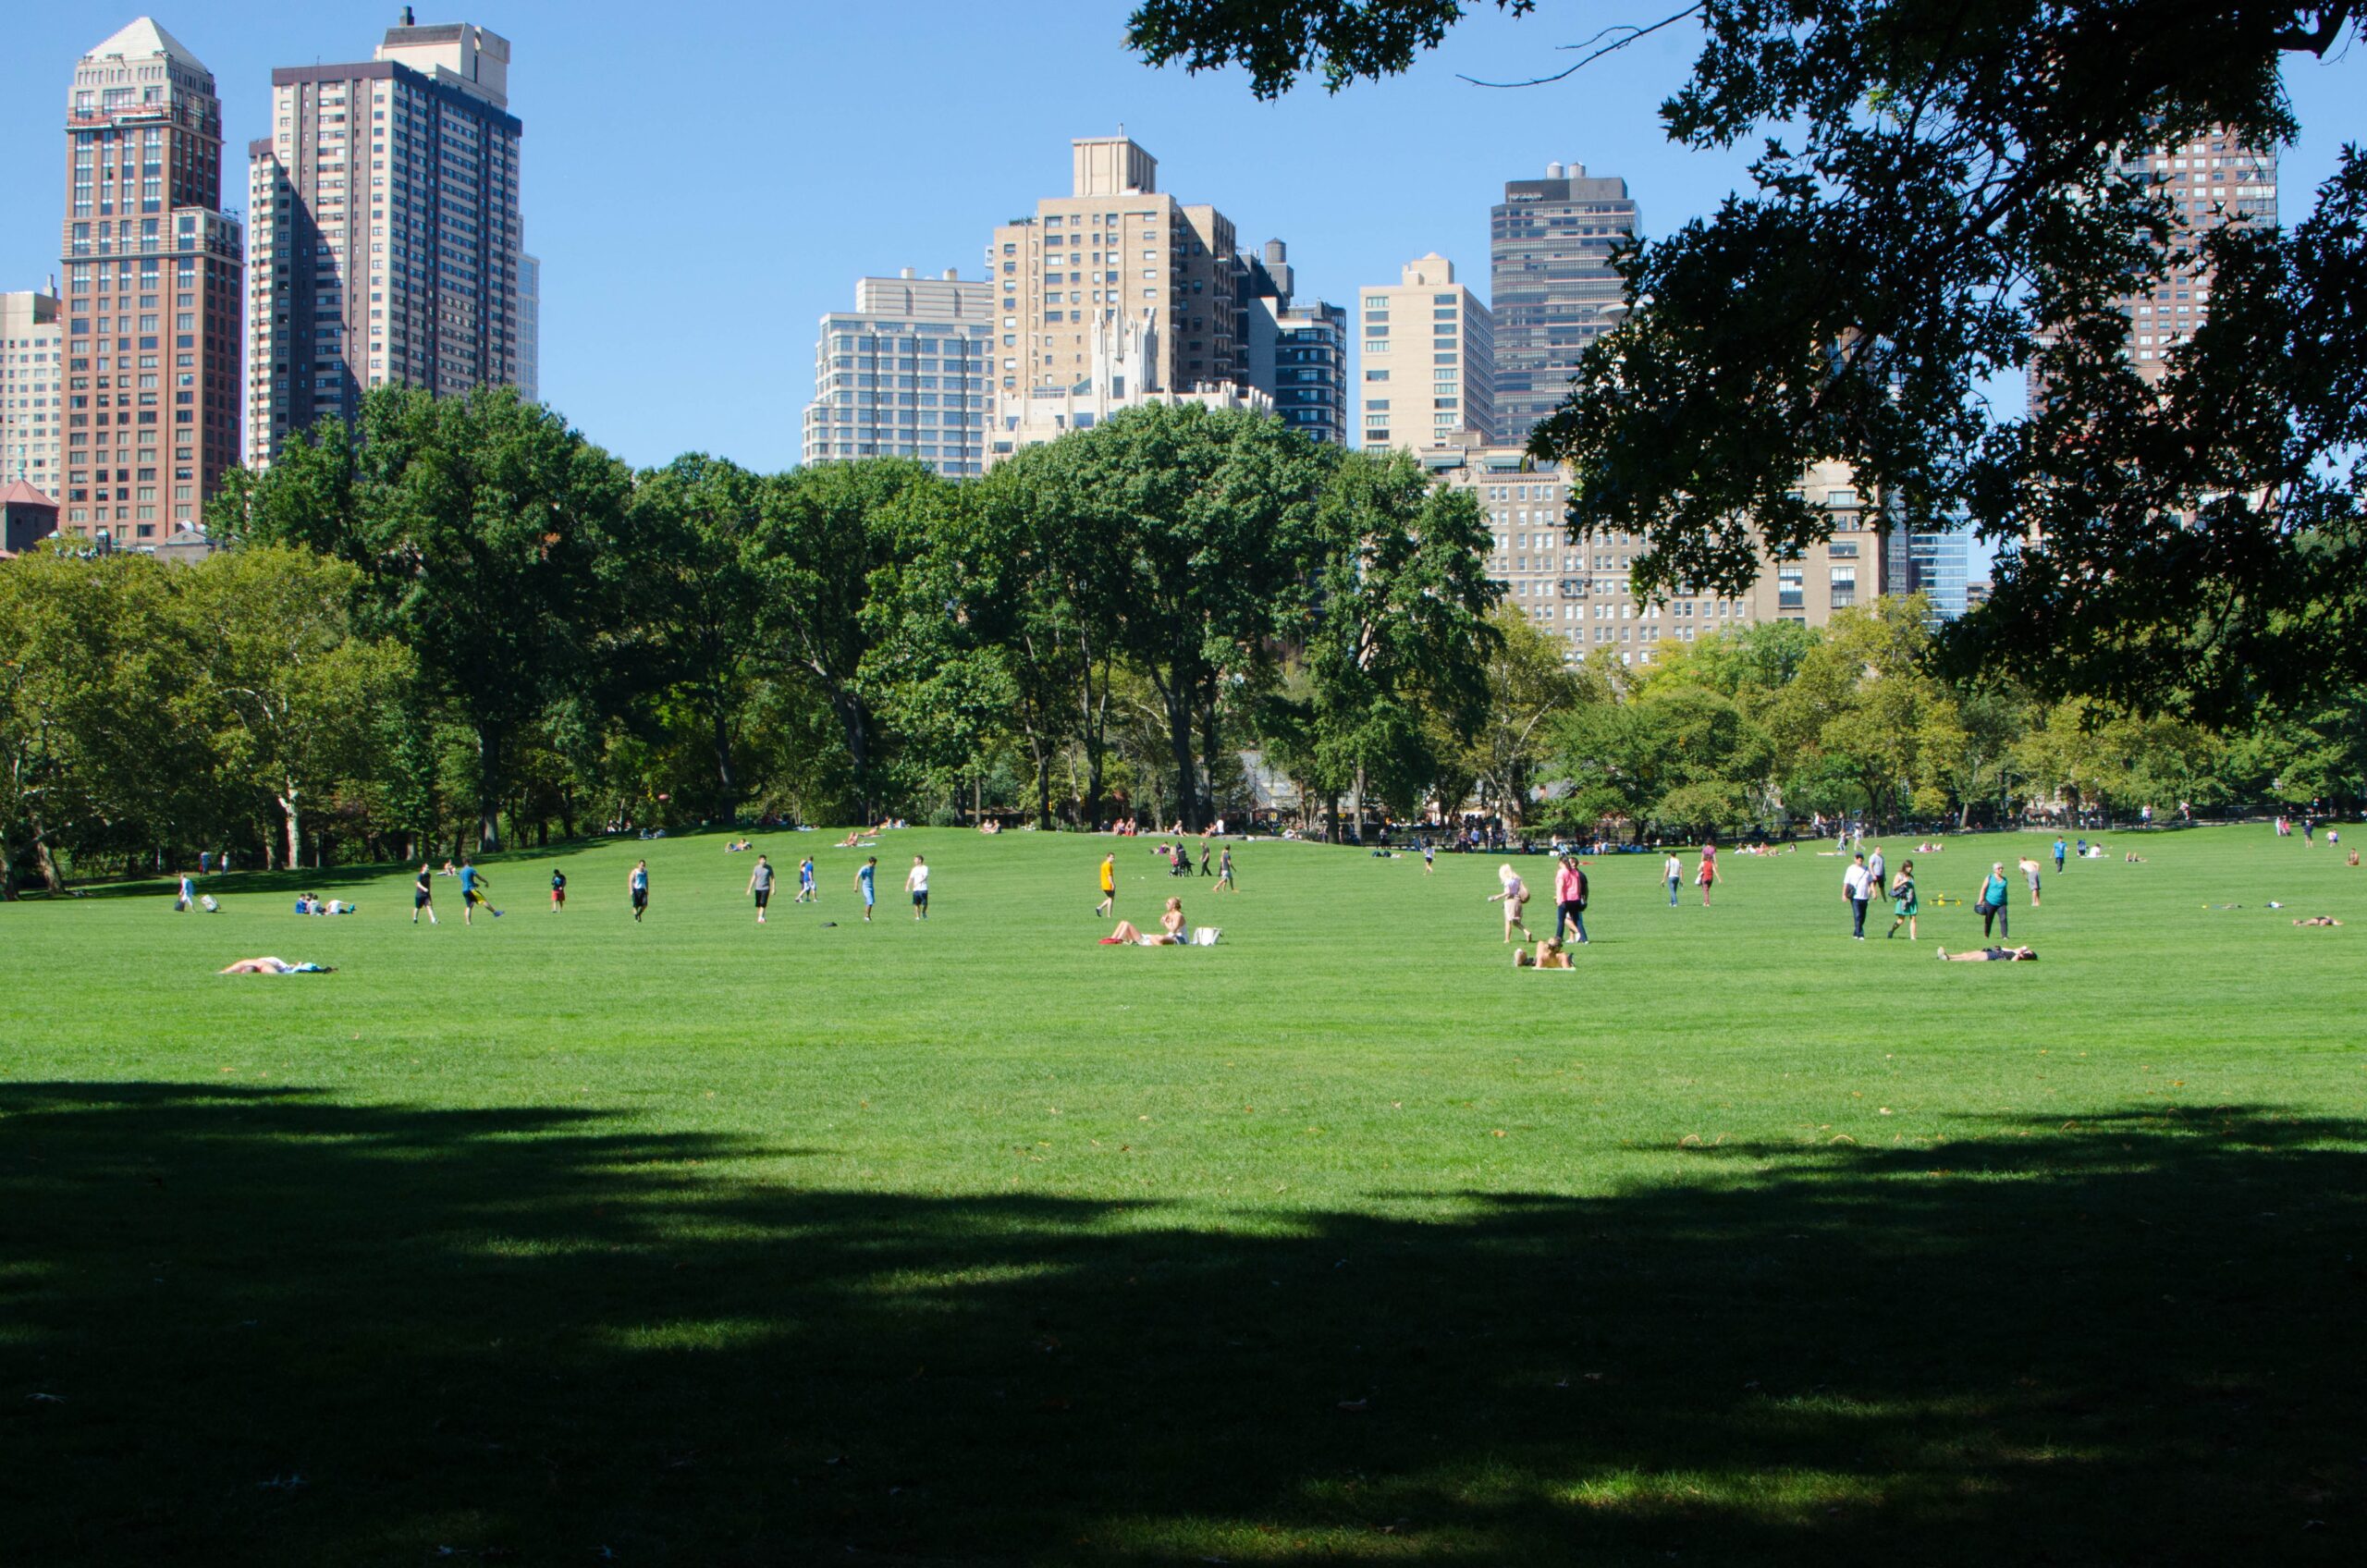 Best Places to Visit in NYC - Central Park NYC